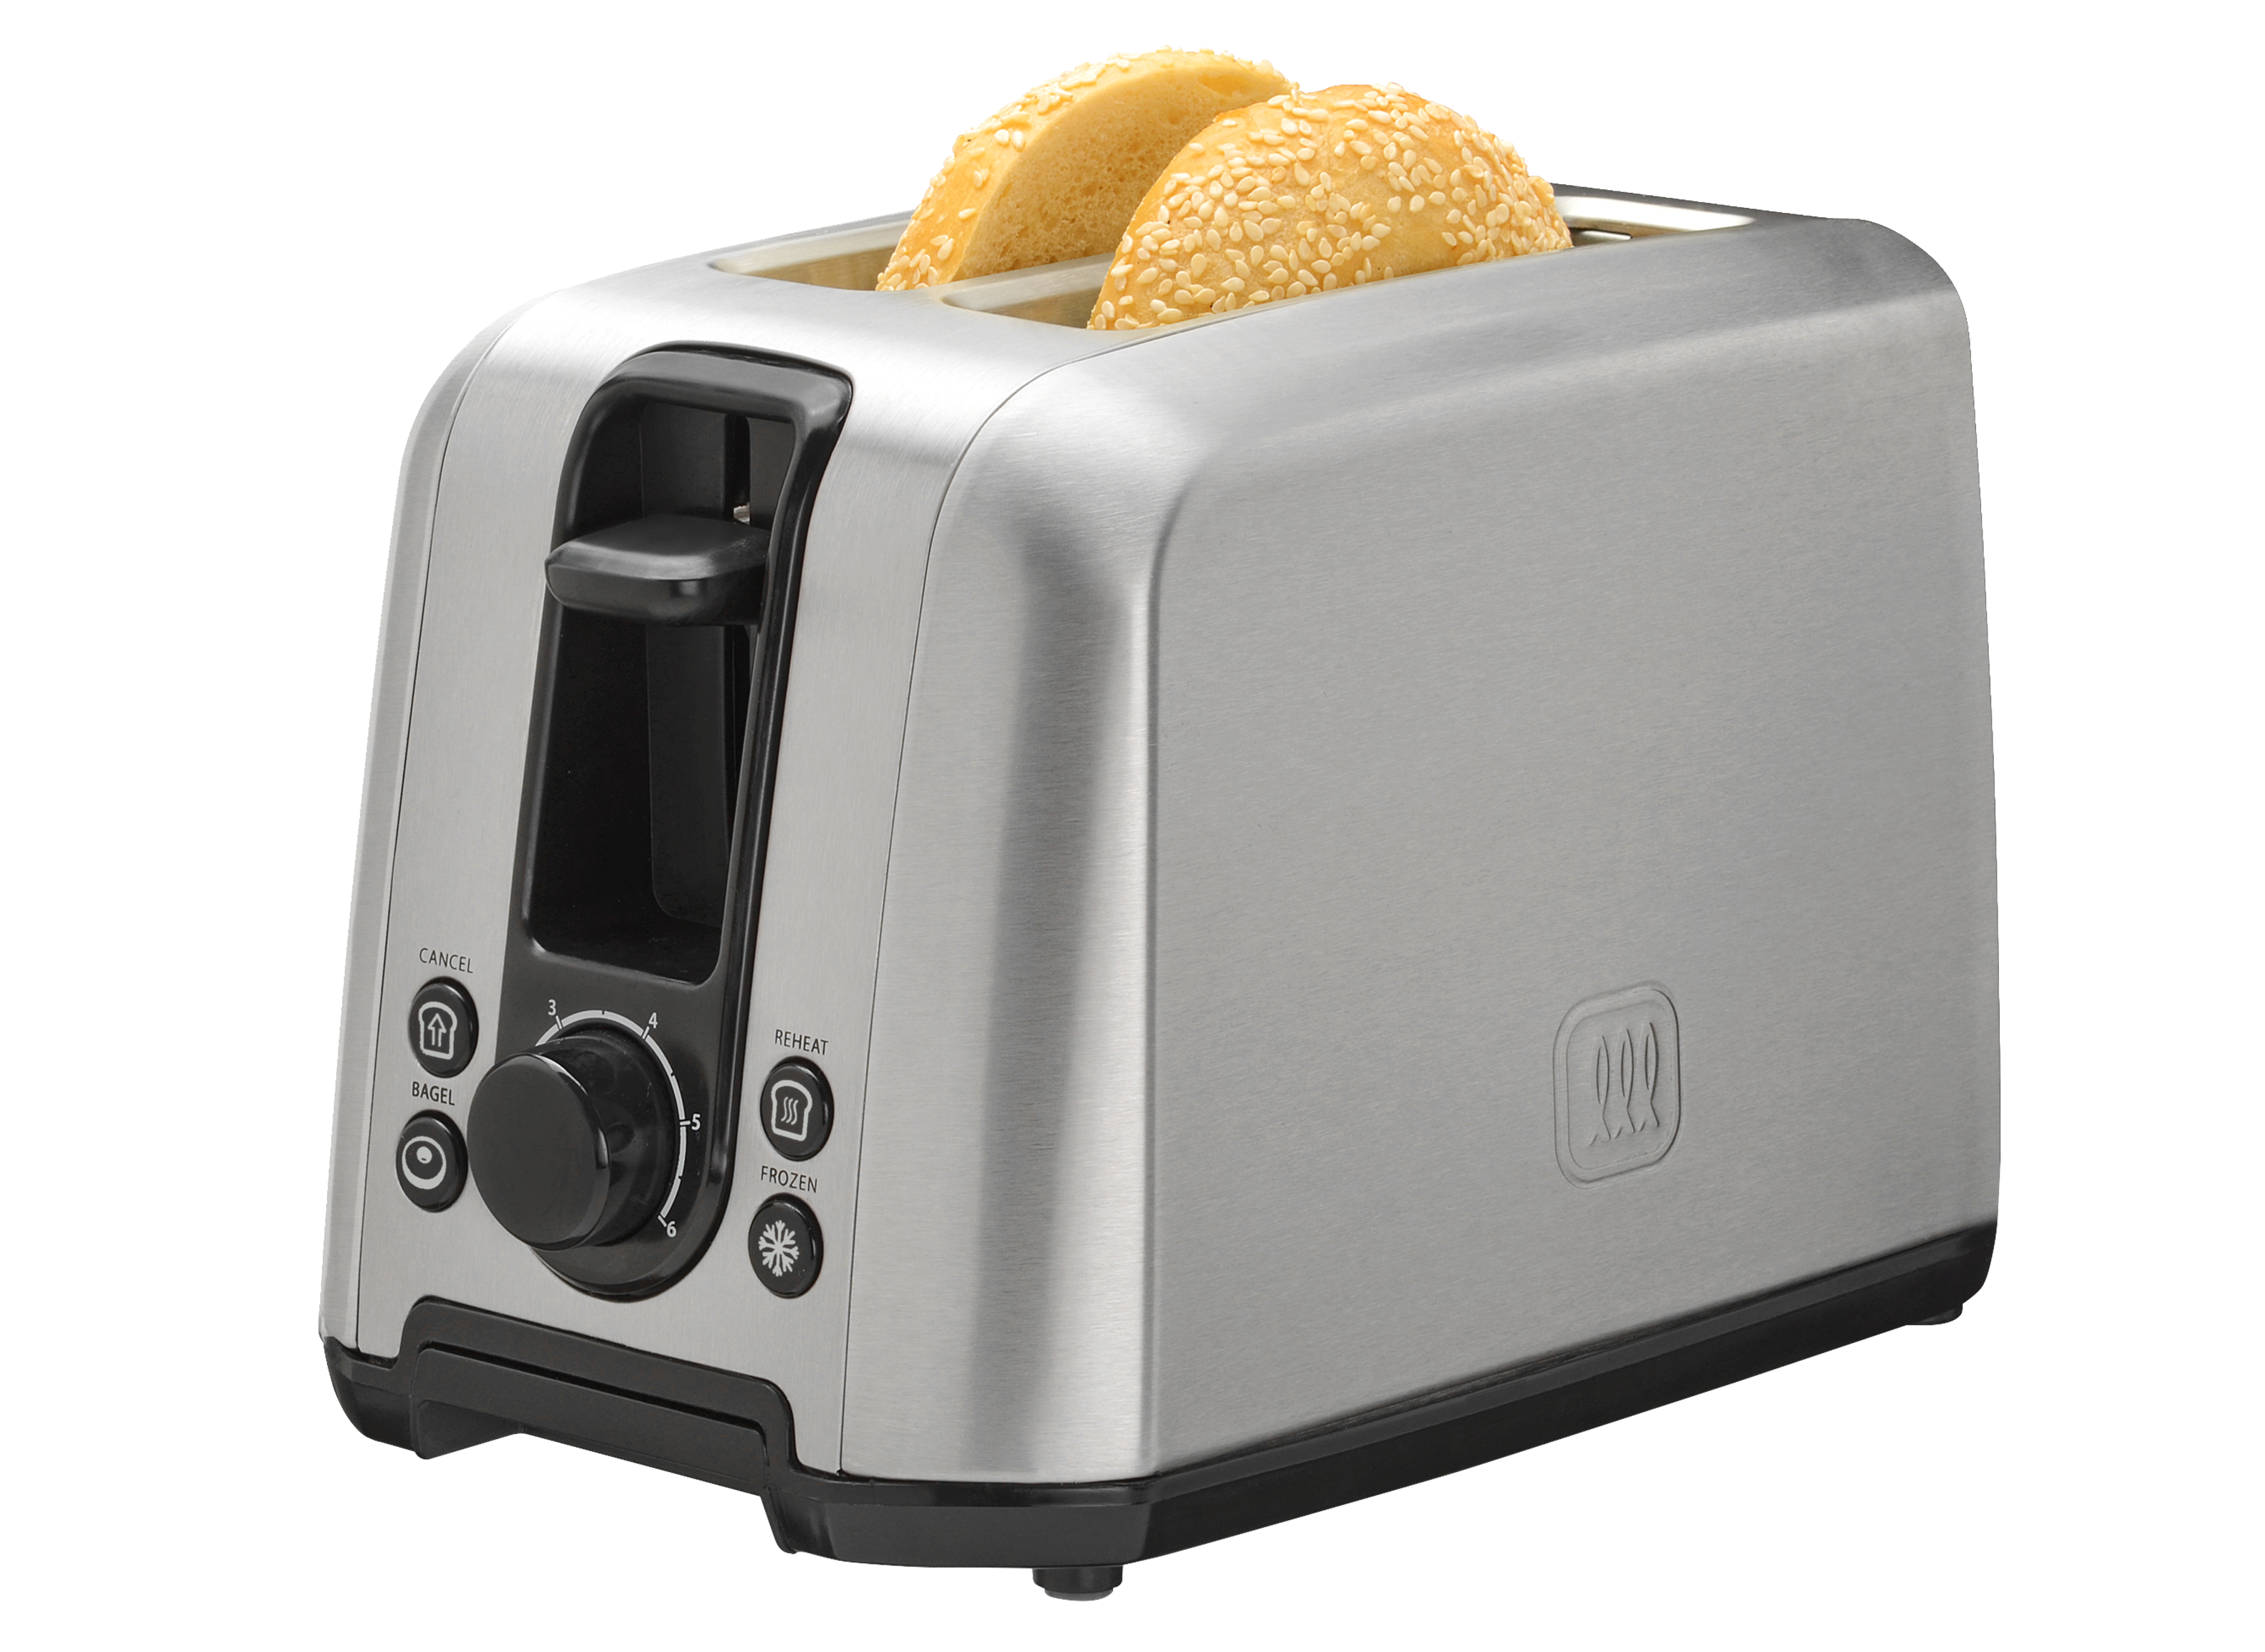 https://crdms.images.consumerreports.org/prod/products/cr/models/395990-2-slice-toasters-toastmaster-2-slice-wide-slot-tm-22ts-10001184.png